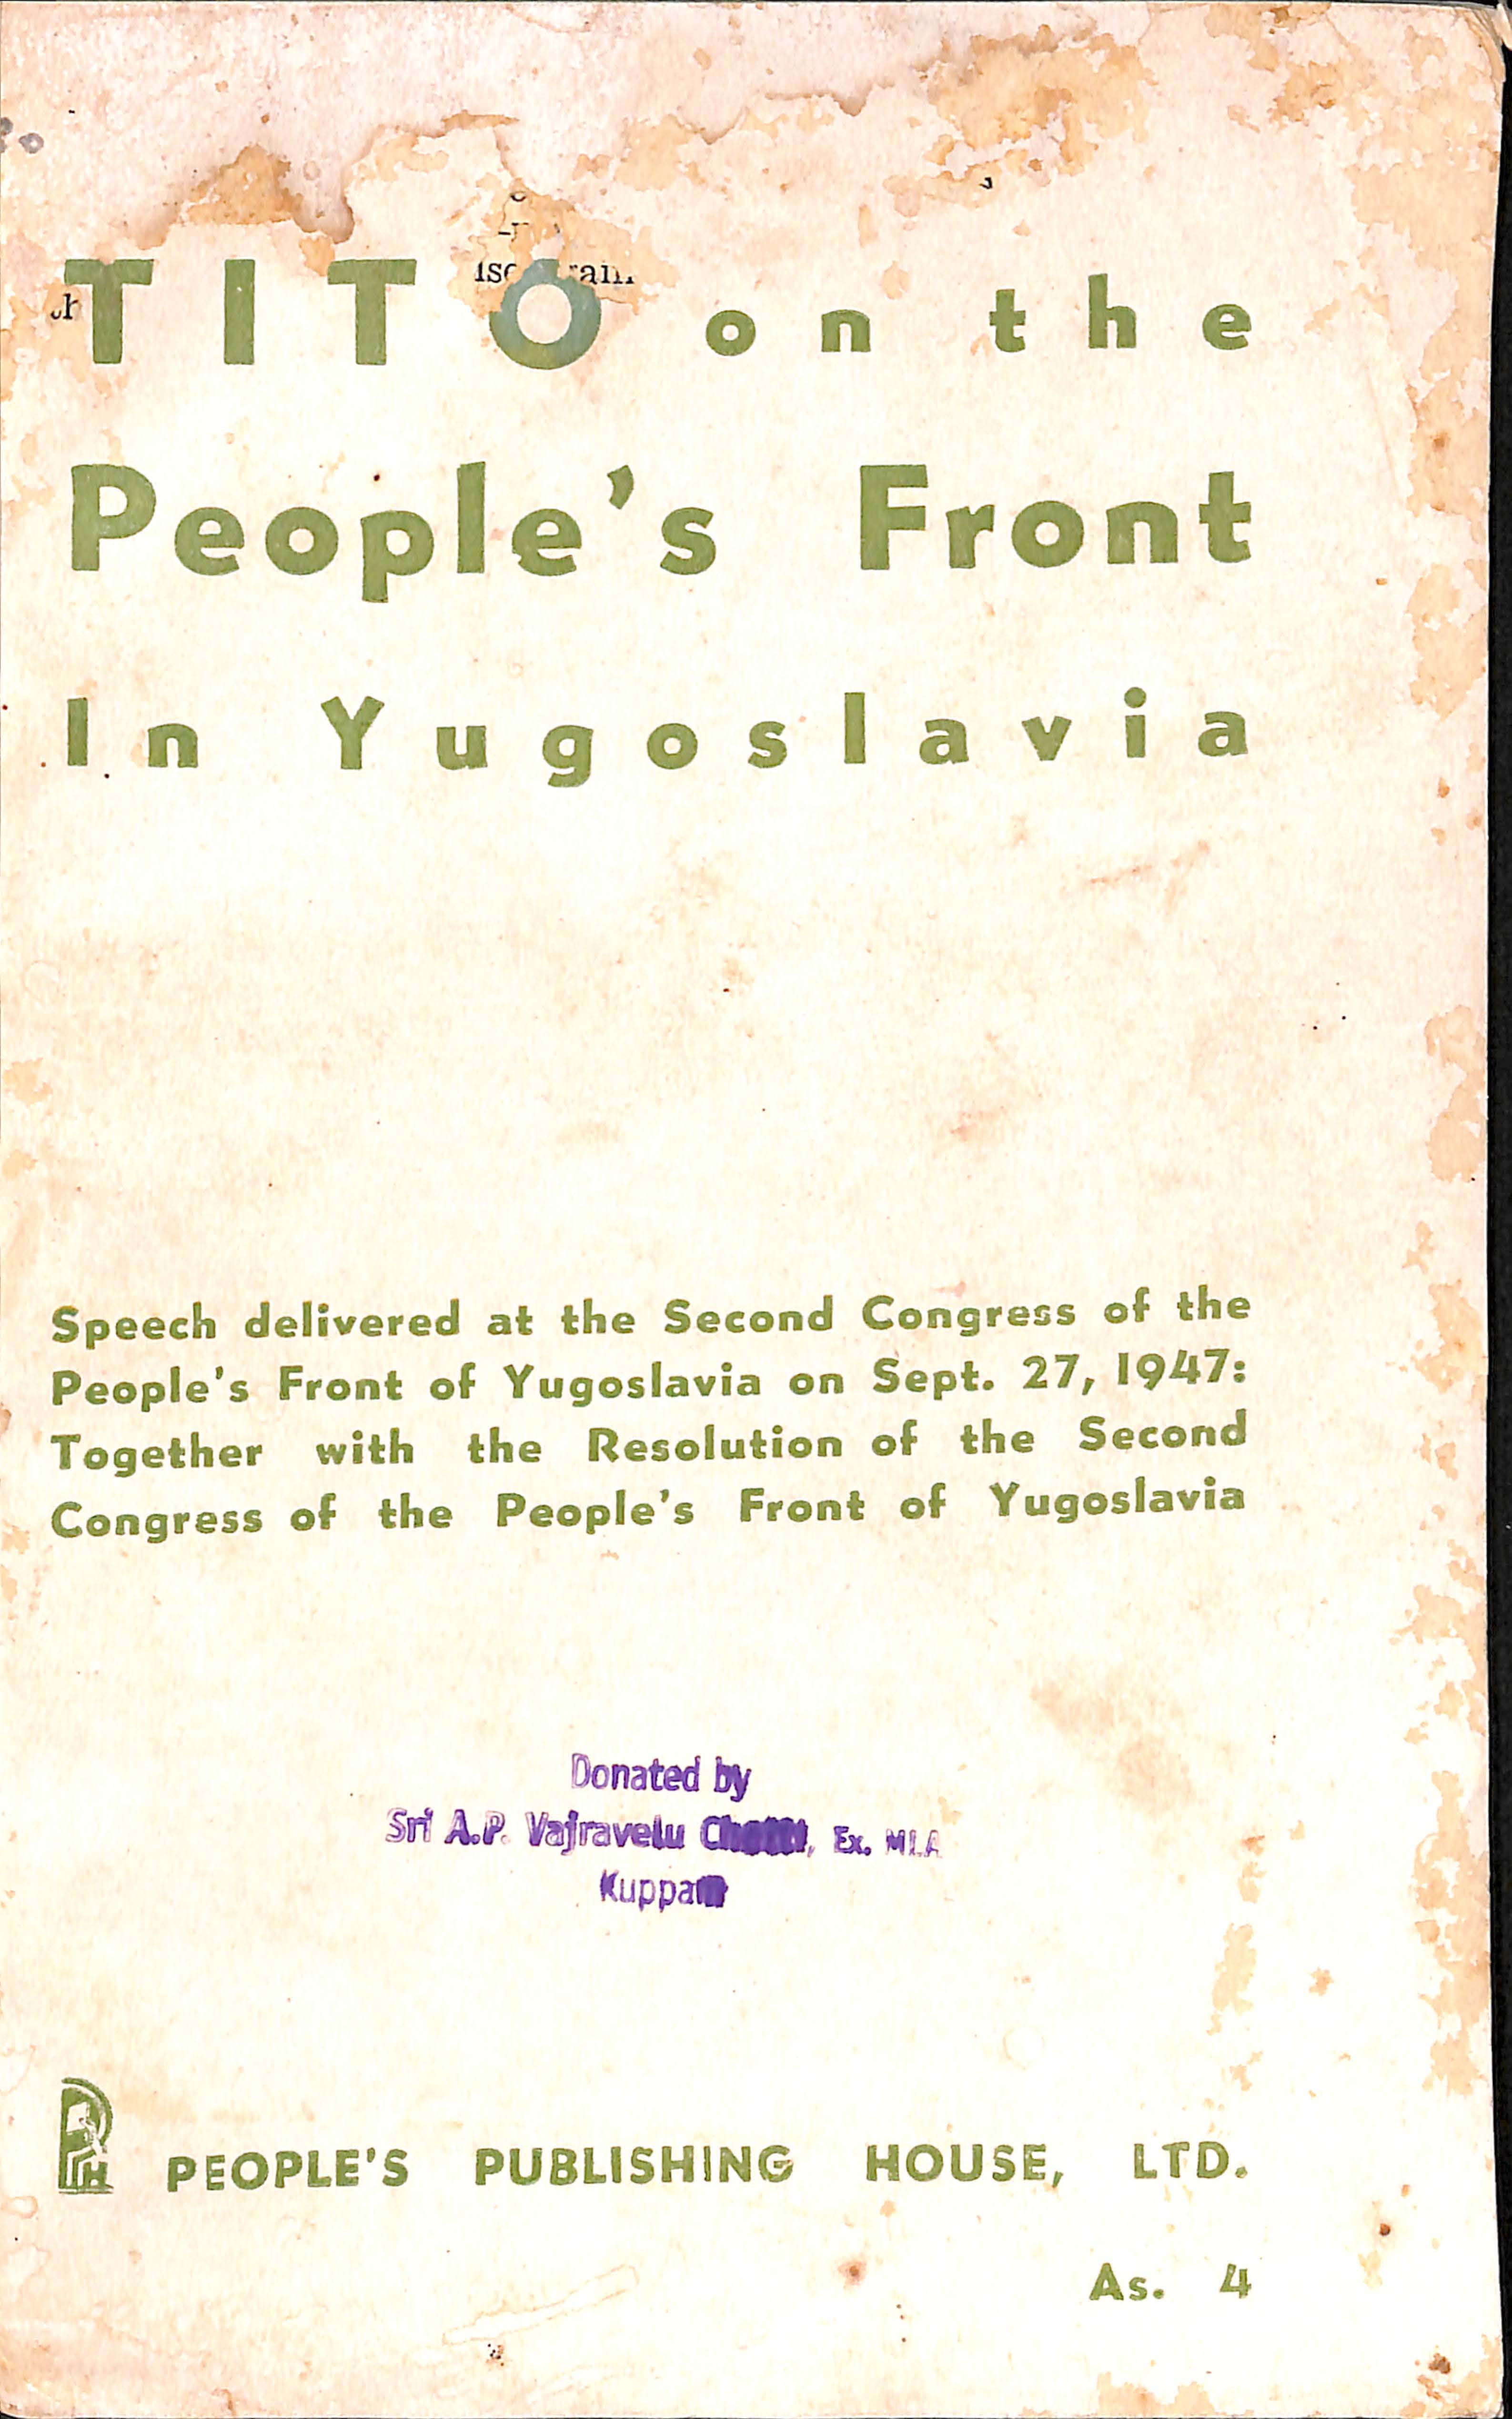 Tito on the people's front in yugoslavia